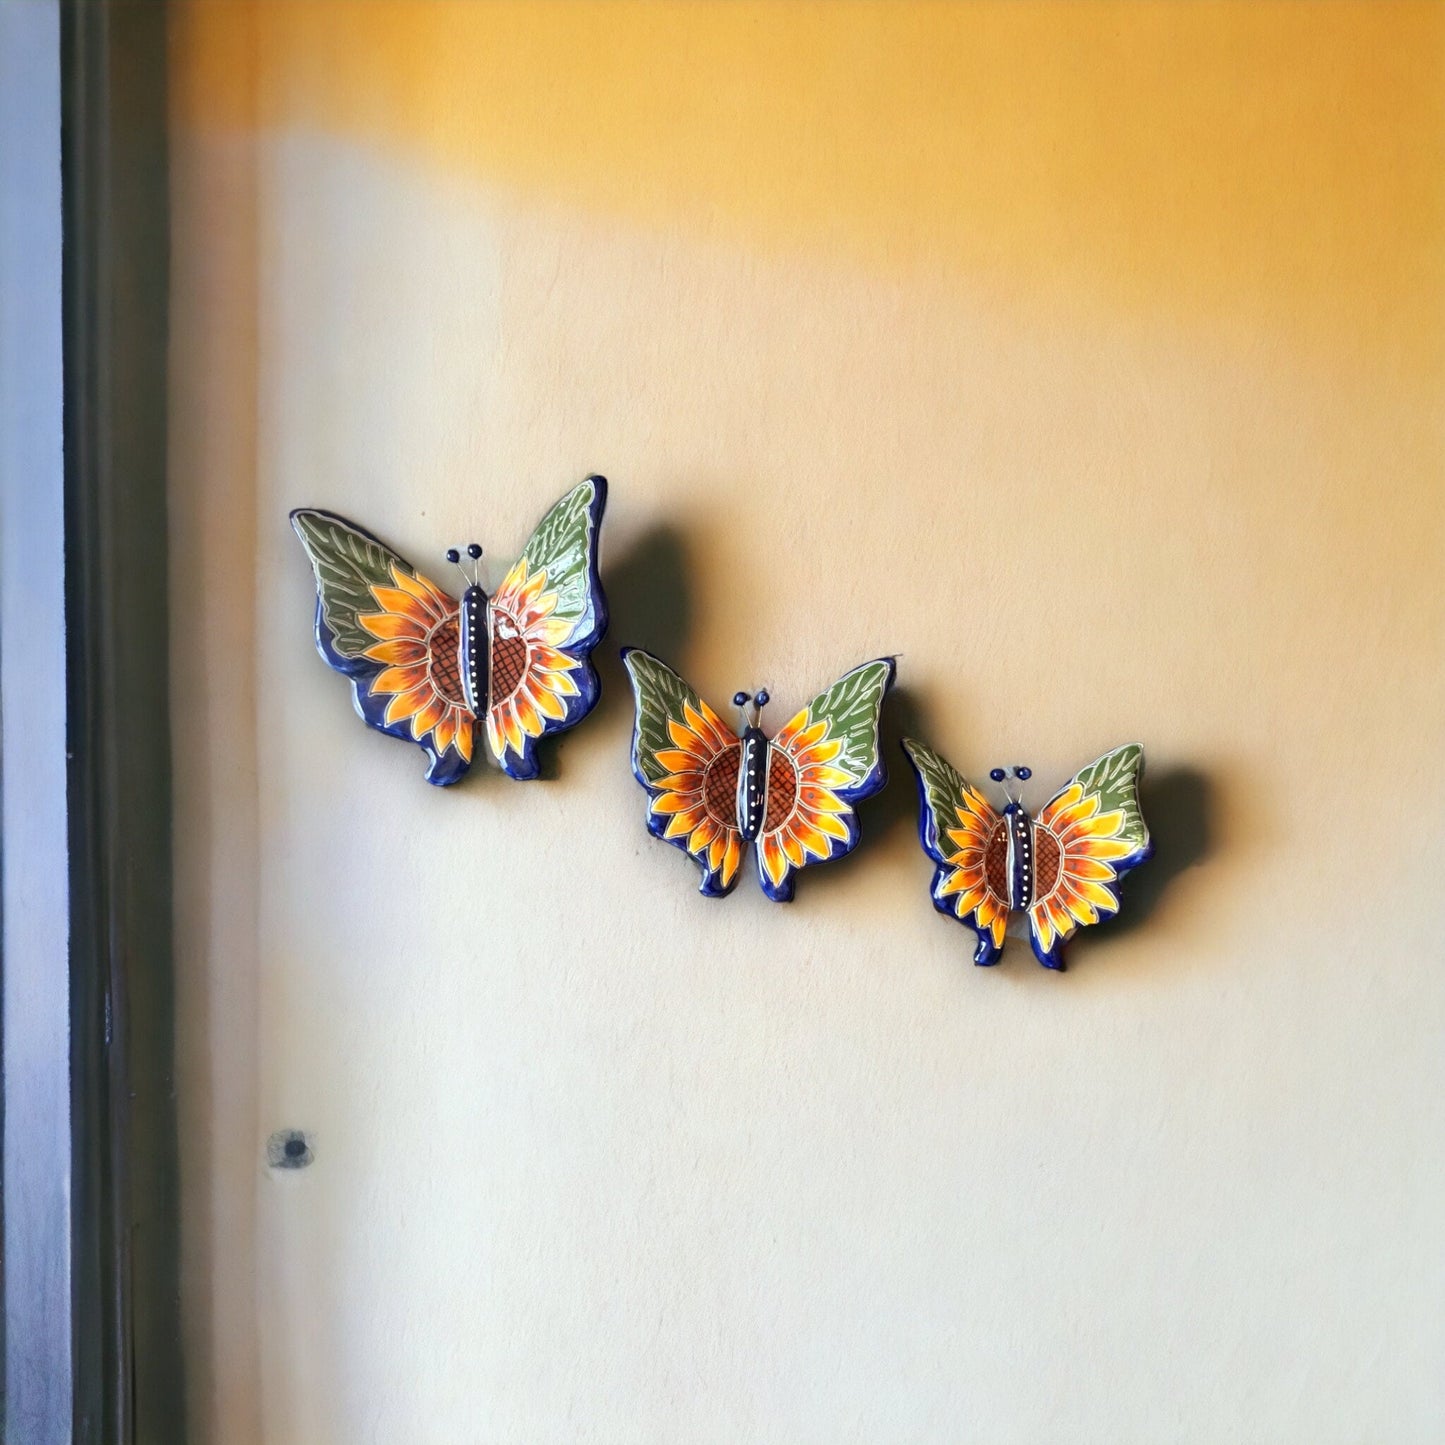 Colorful Mexican Handmade Butterfly Wall Art Set of 3 | Vibrant Wall Hanging Decor